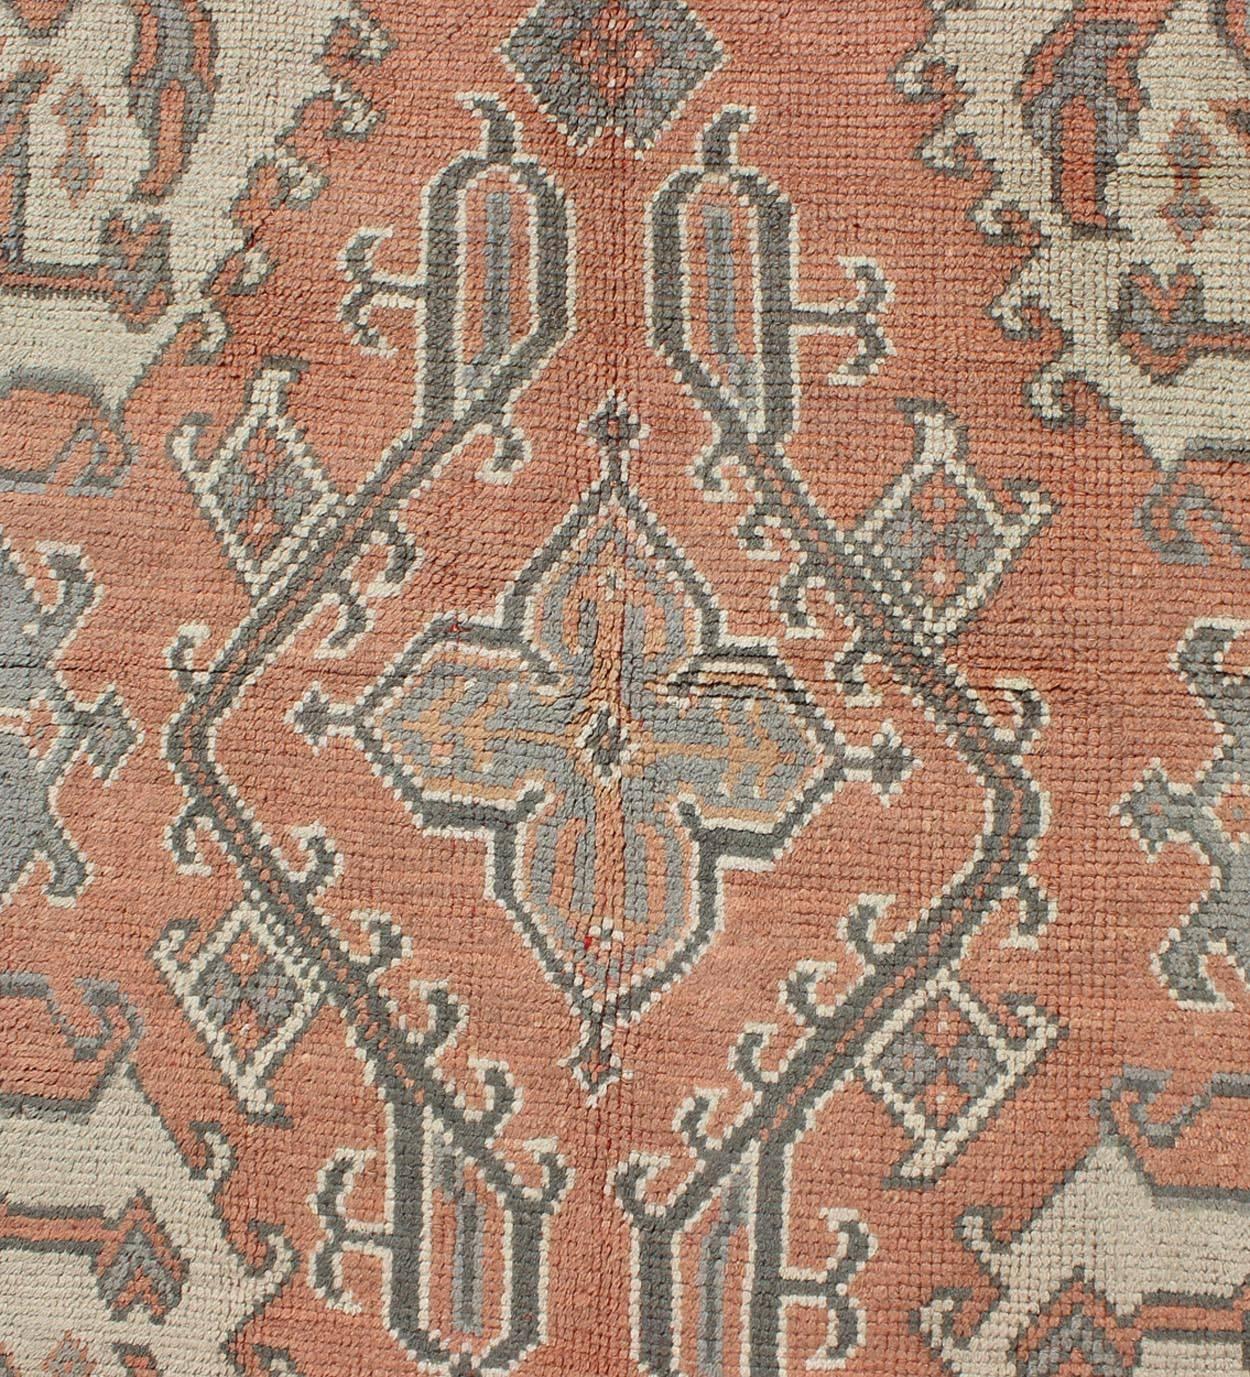 Early 20th Century Antique Oushak Rug from Turkey with Central Medallion and Sub-Geometric Elements For Sale